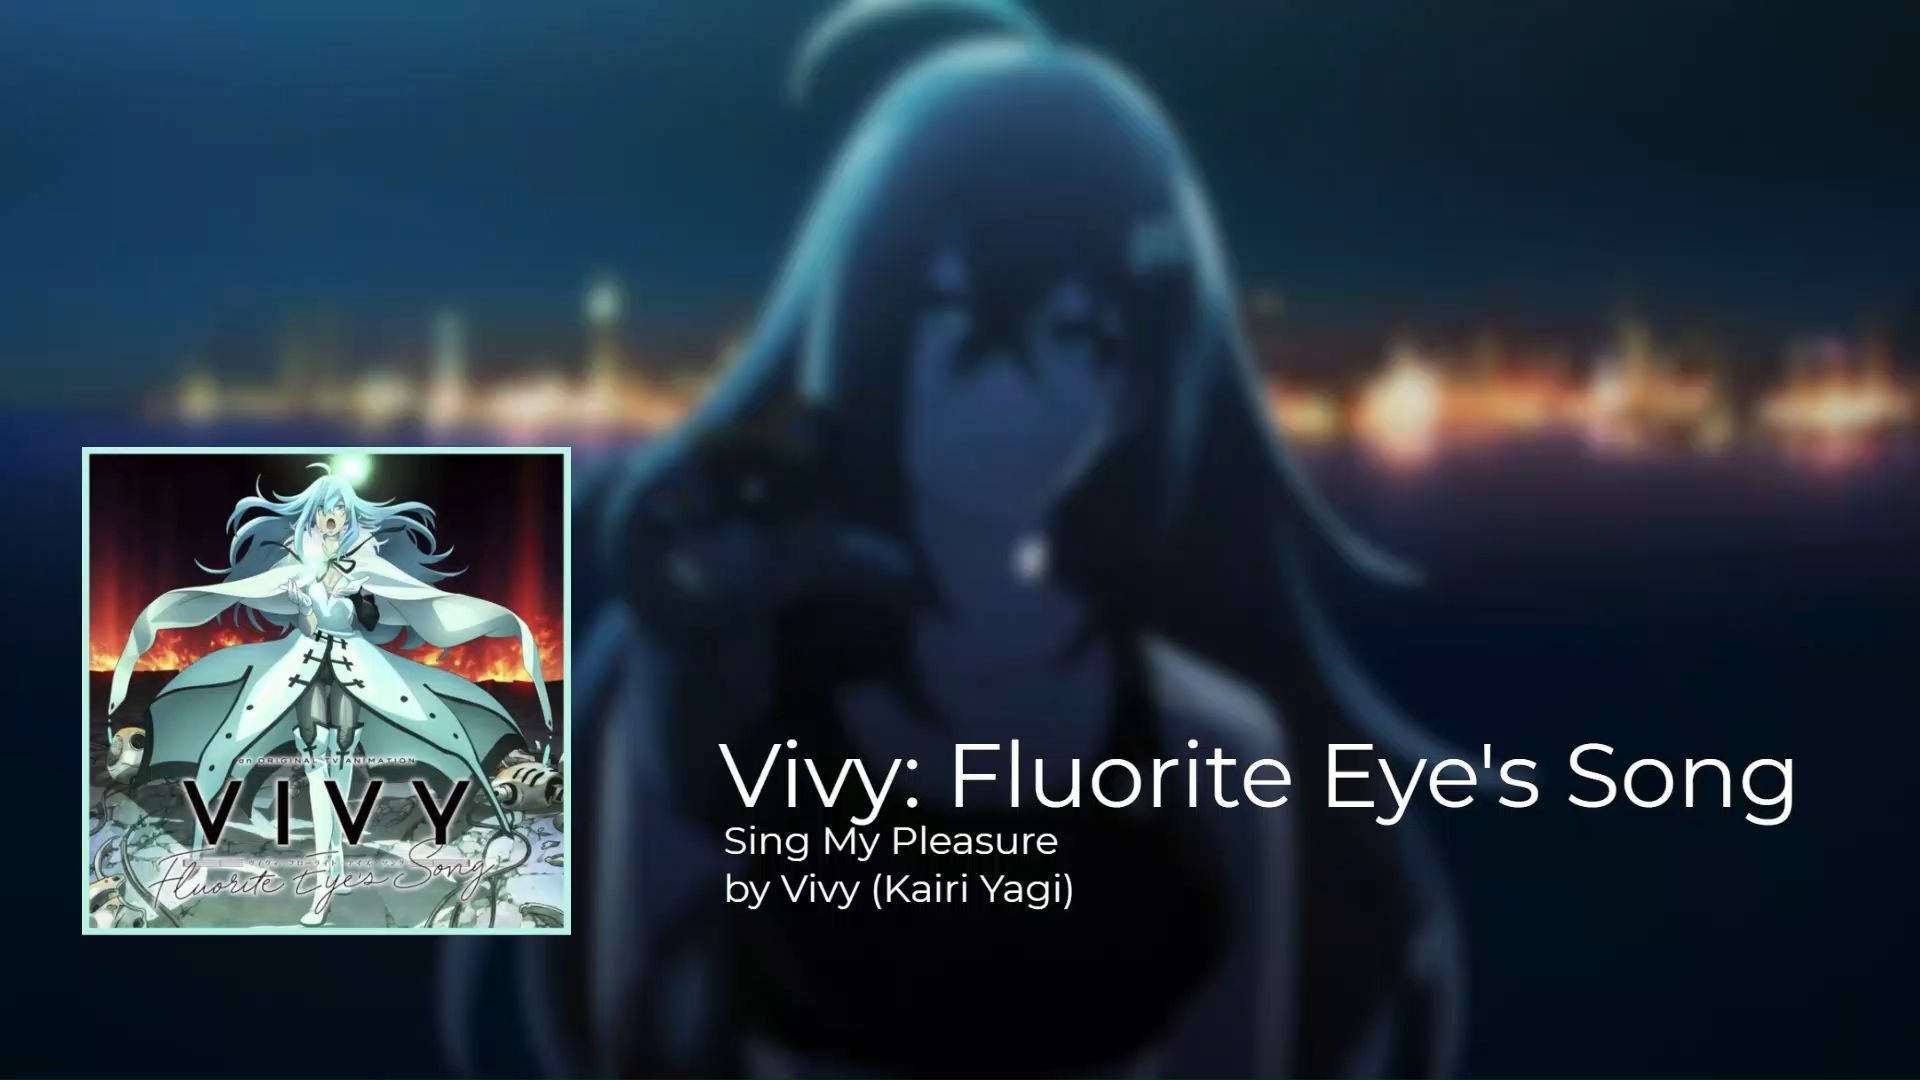 Vivy Fluorite Eyes Song  Songs from Vivy Fluorite Eyes Song are  now available for streaming on both Spotify and Apple Music Check them out  at the playlists below Spotify  httpsopenspotifycomplaylist6oNwTOtvndlSK8baxKDNDusi 